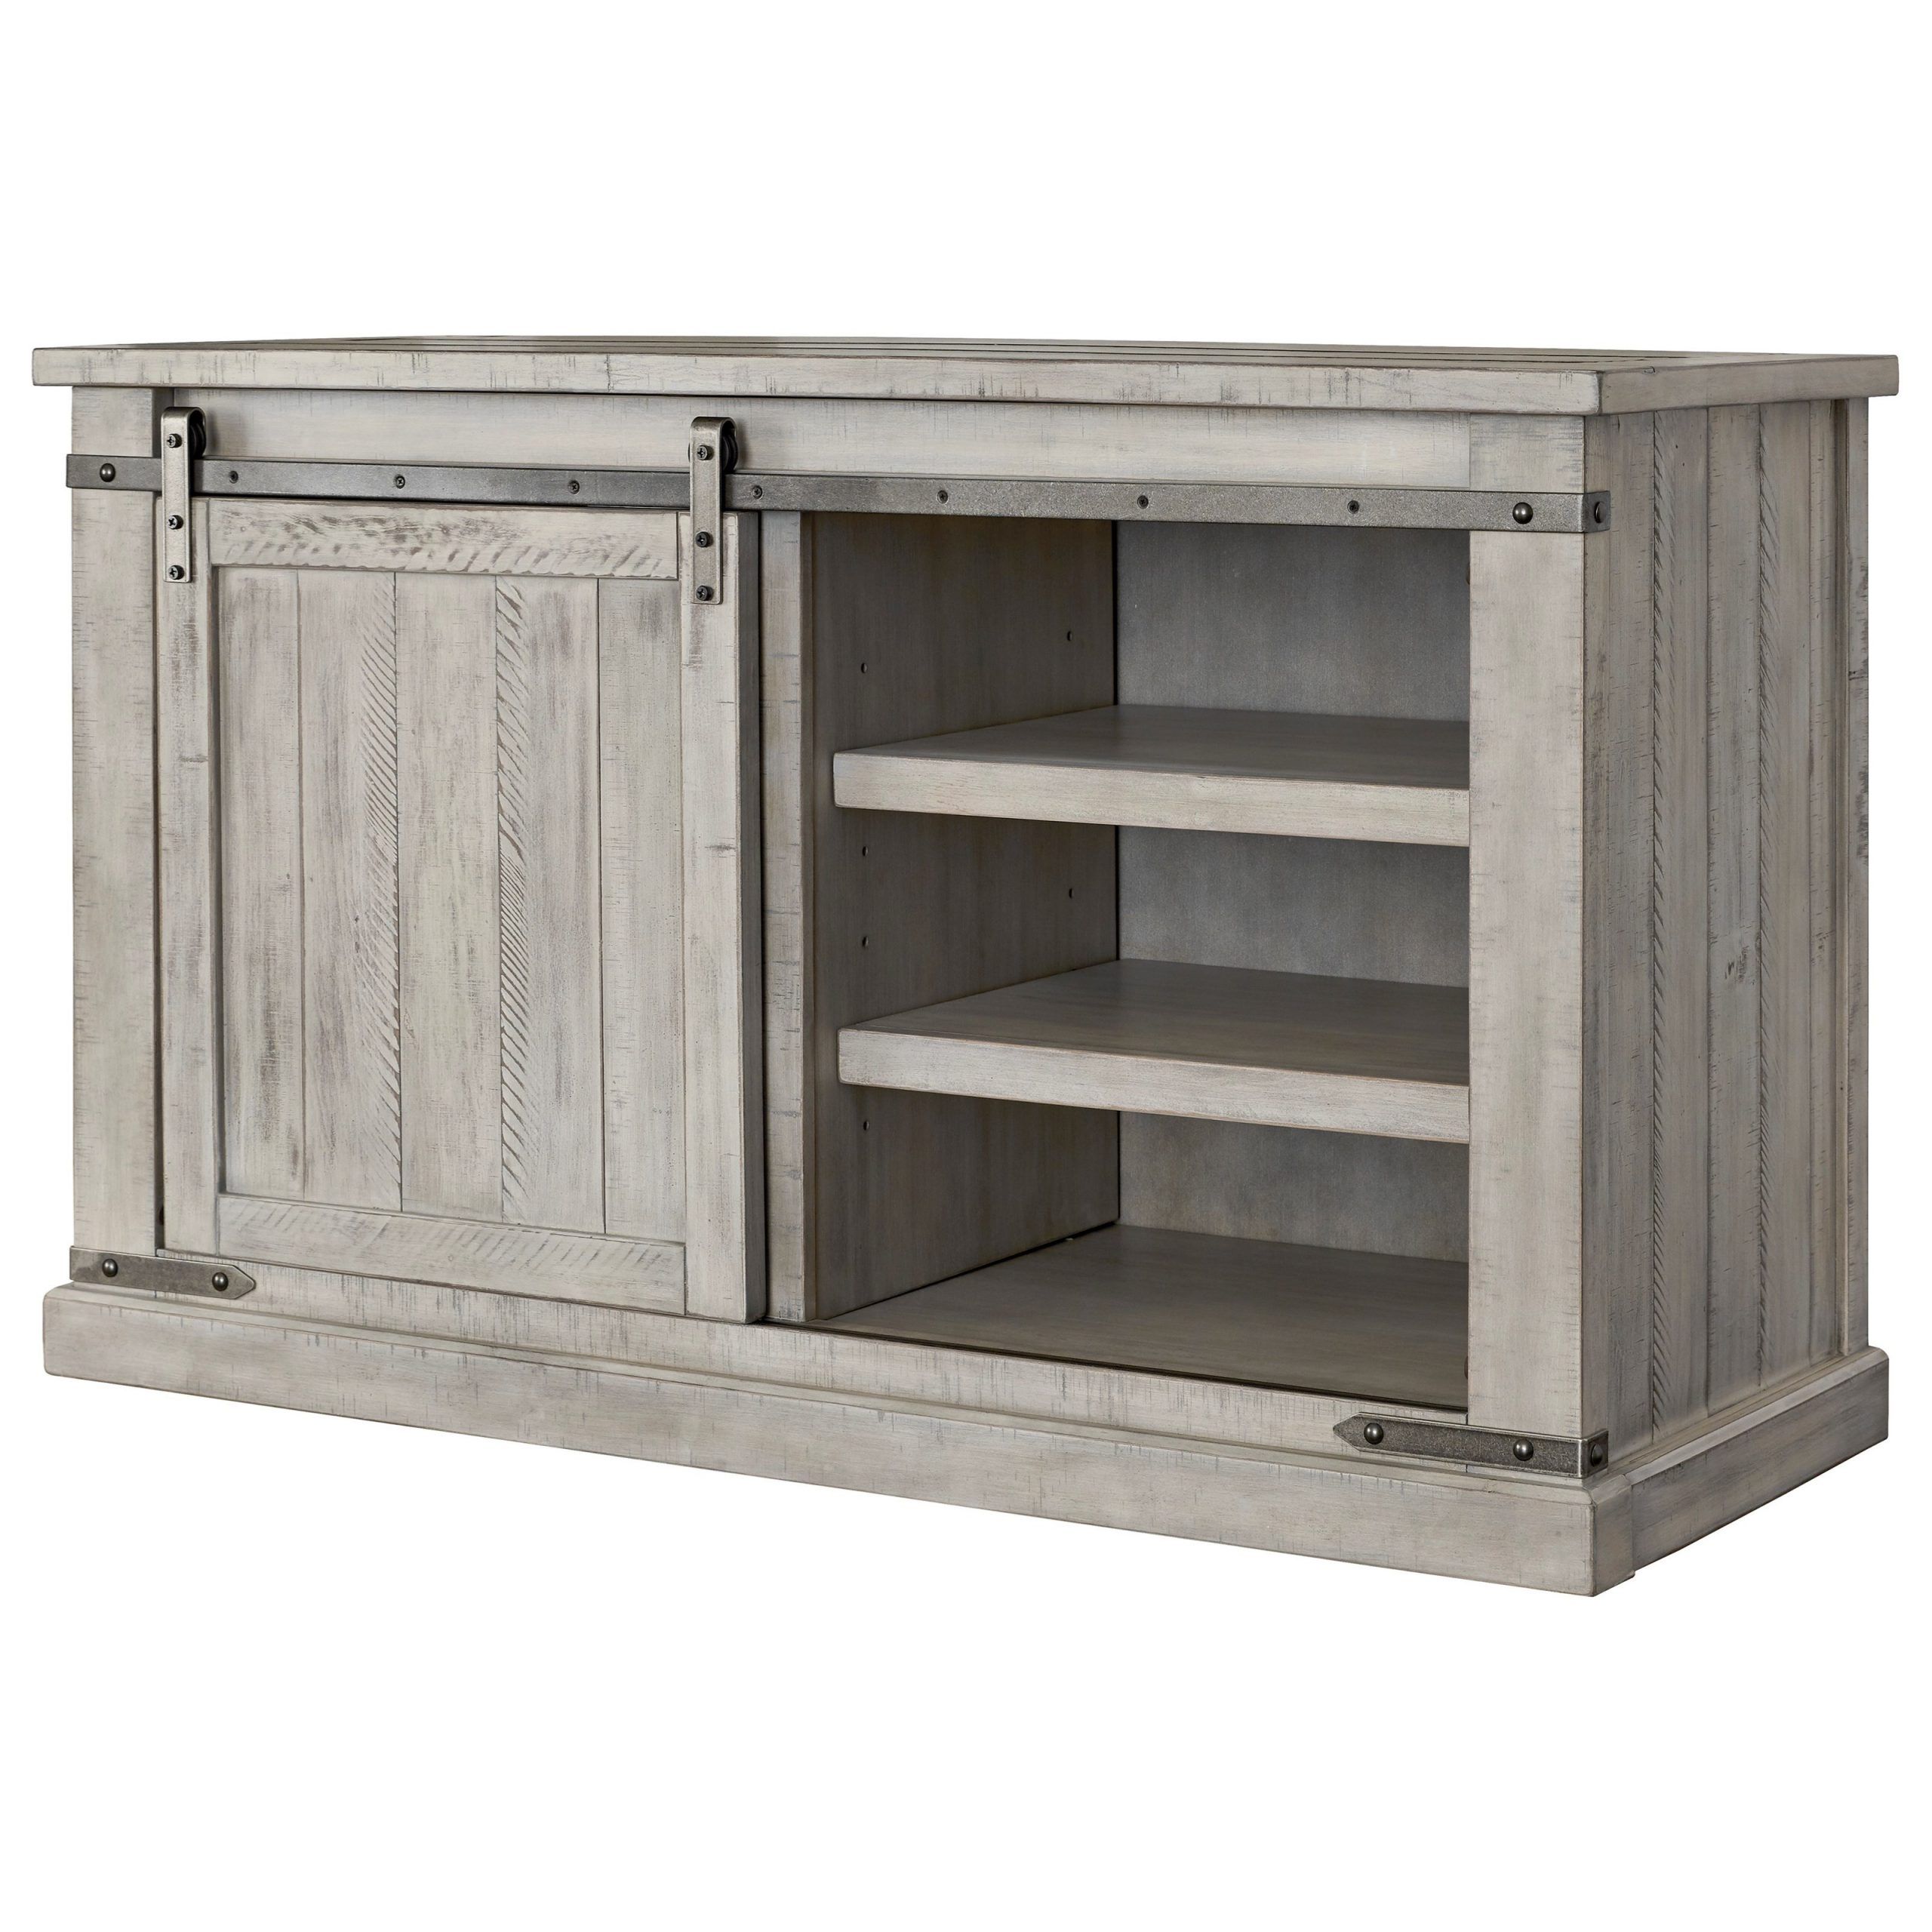 Styleline Carynhurst W755 28 Rustic White Medium Tv Stand Pertaining To Tv Stands With Table Storage Cabinet In Rustic Gray Wash (View 12 of 20)